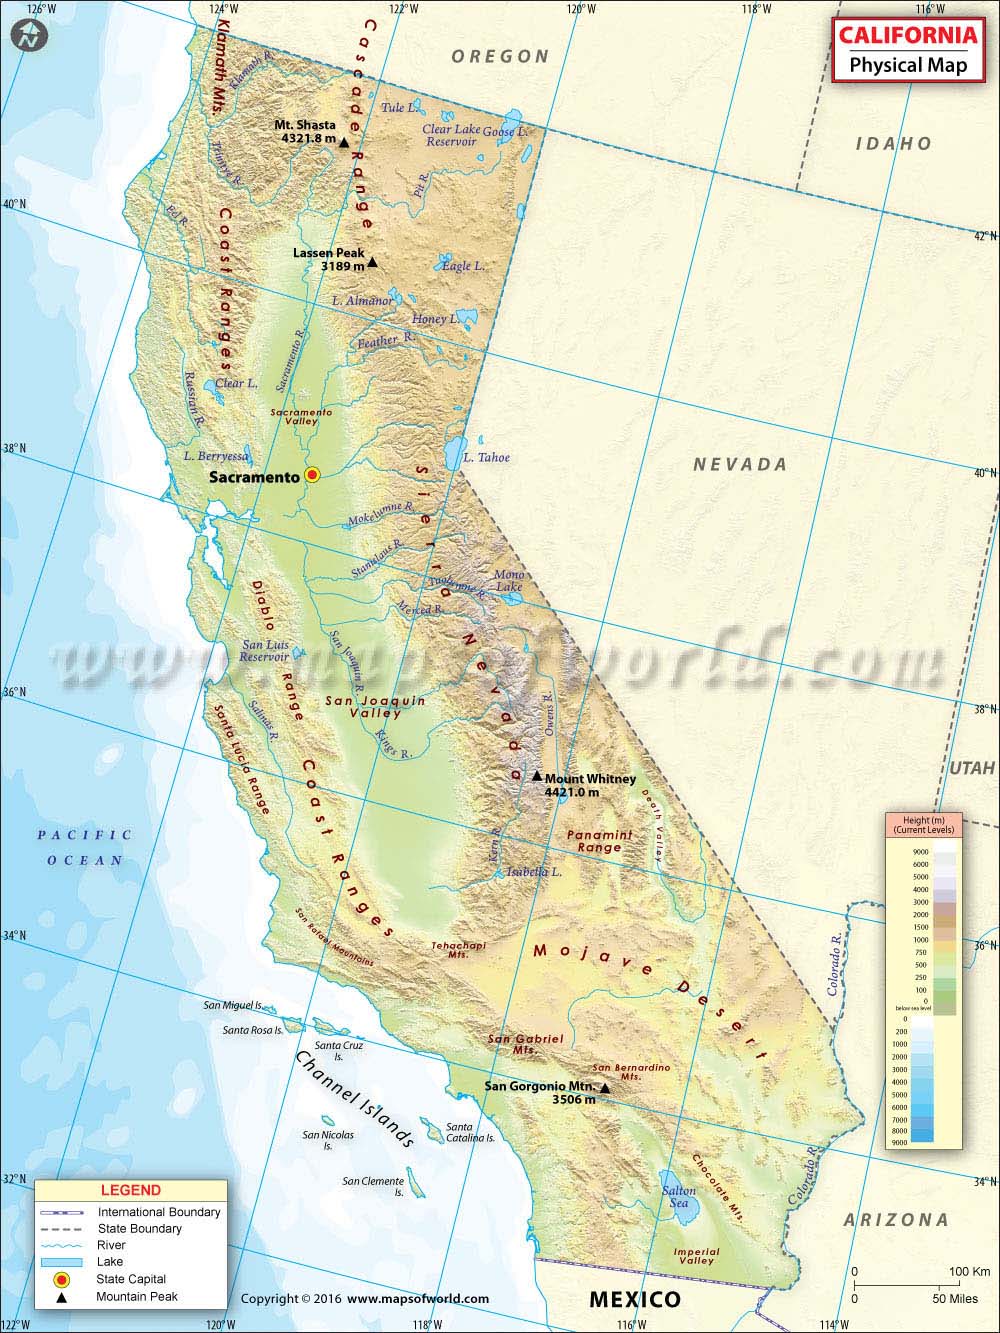 Physical Map of California